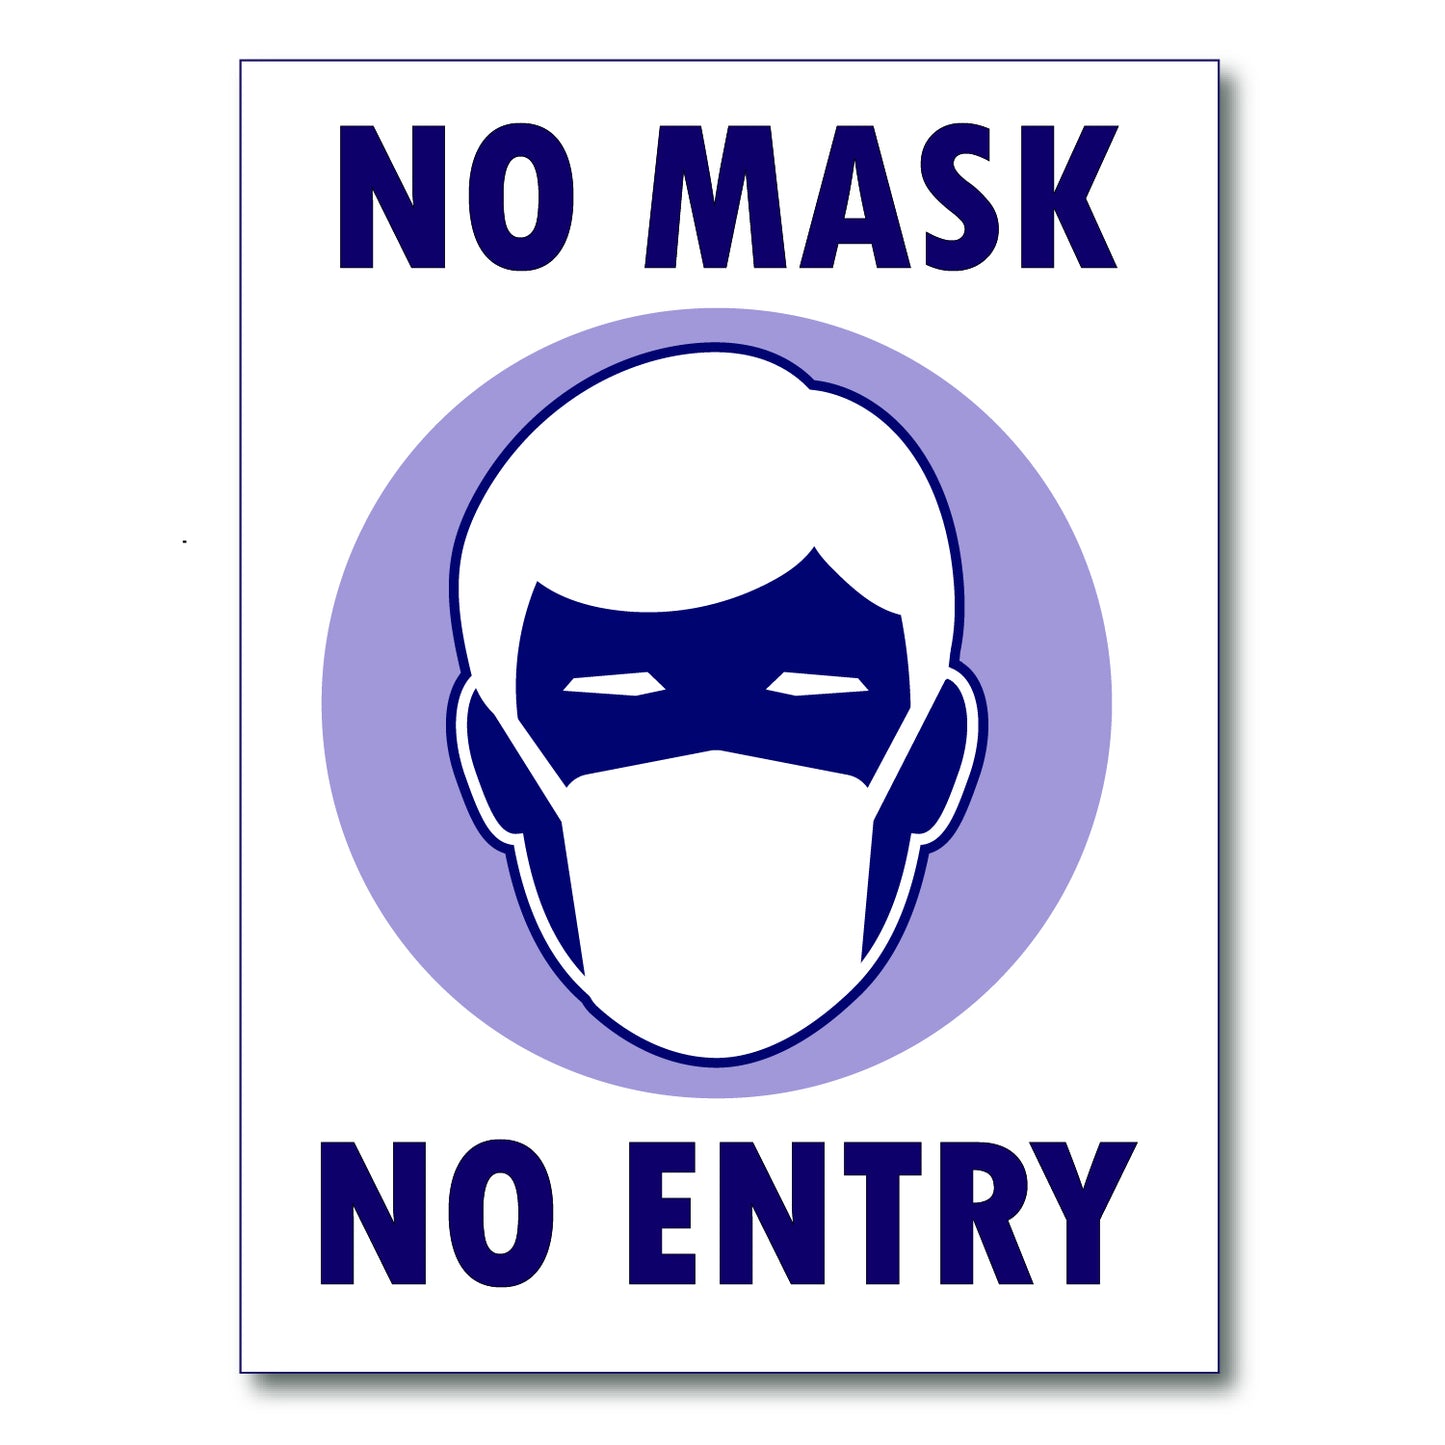 No Mask No entry sign stores covid-19 safety social distancing